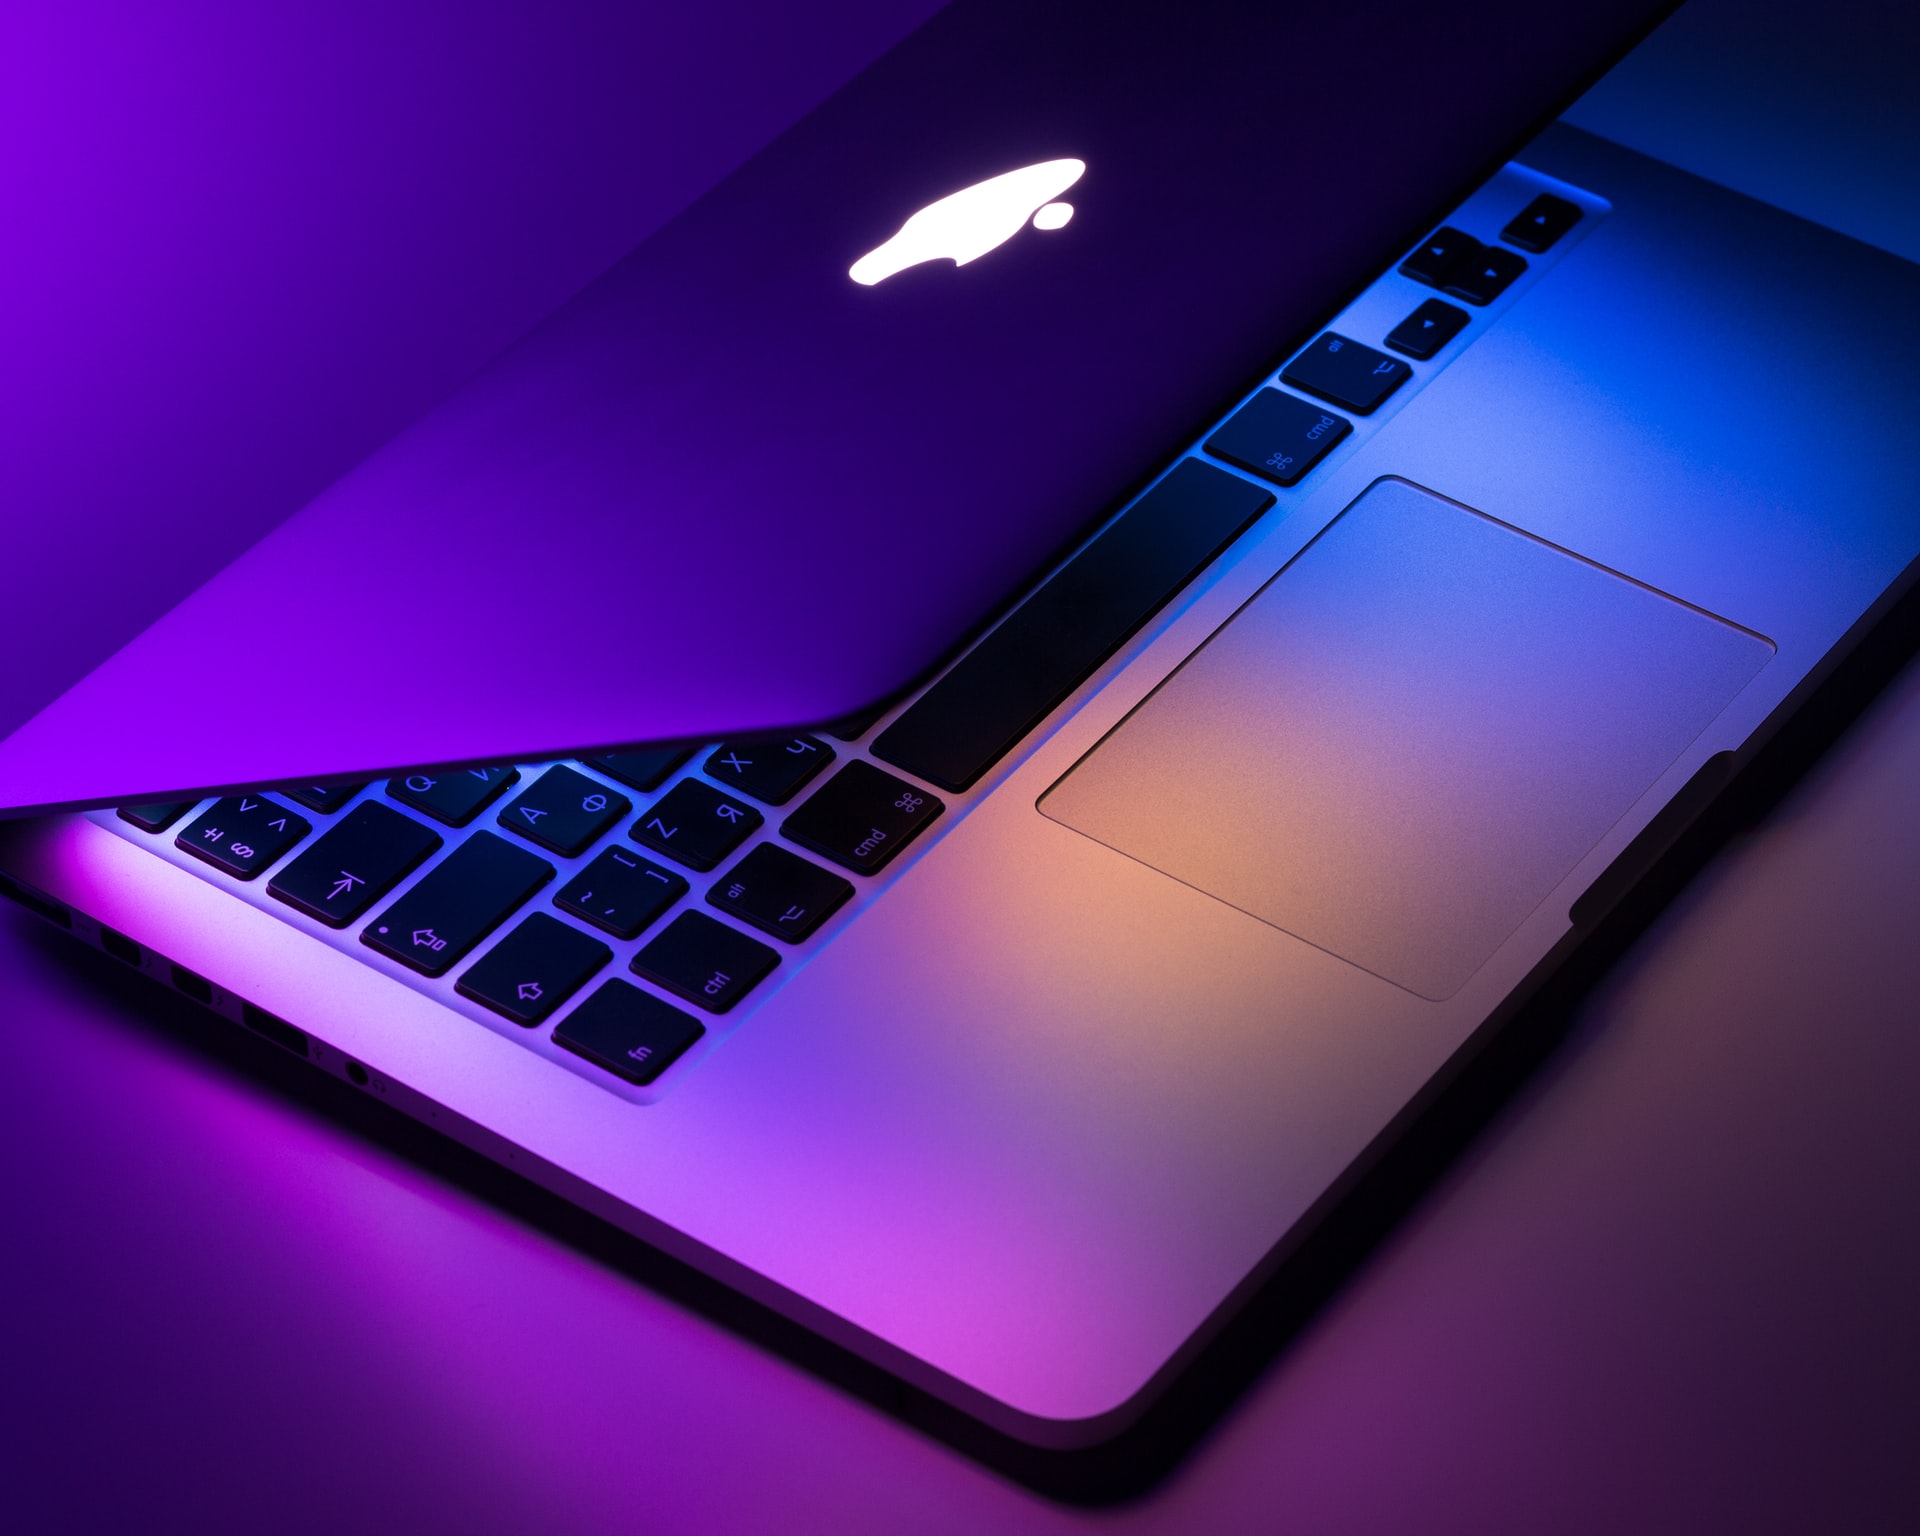 A silver MacBook opening its lid with ambient purple light.